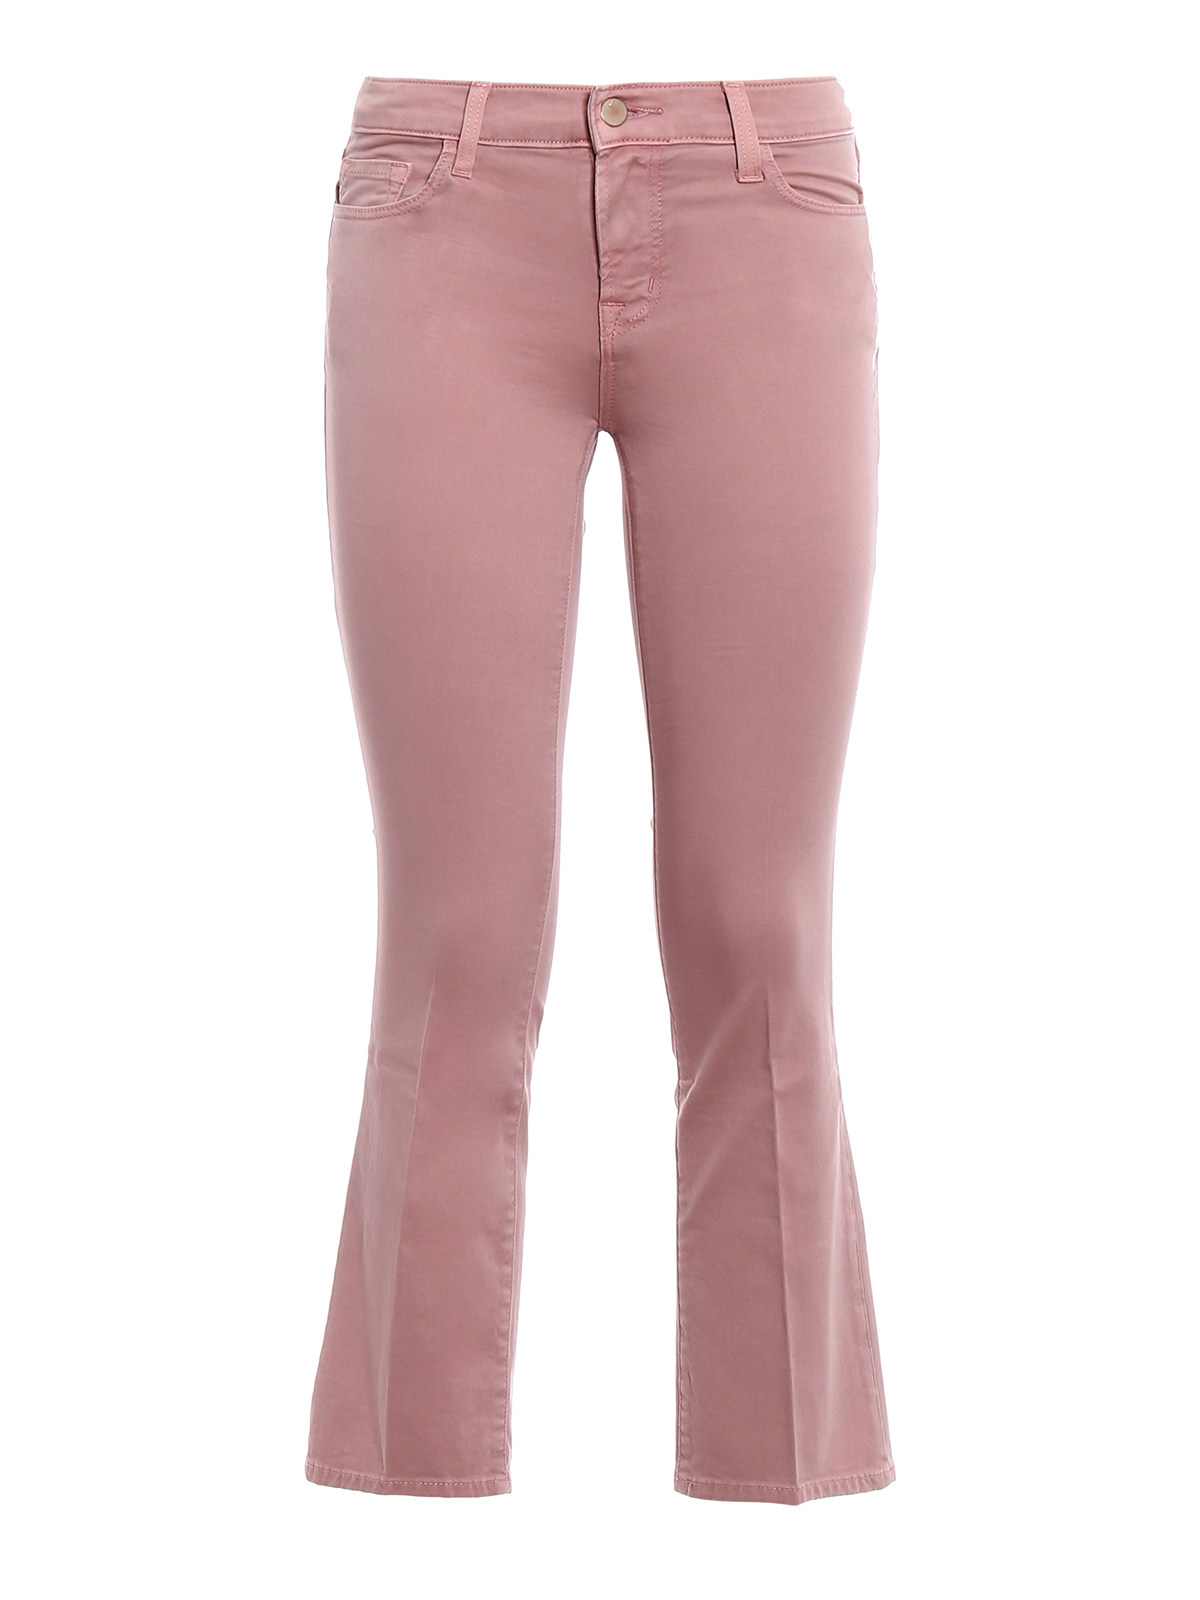 pink bootcut jeans